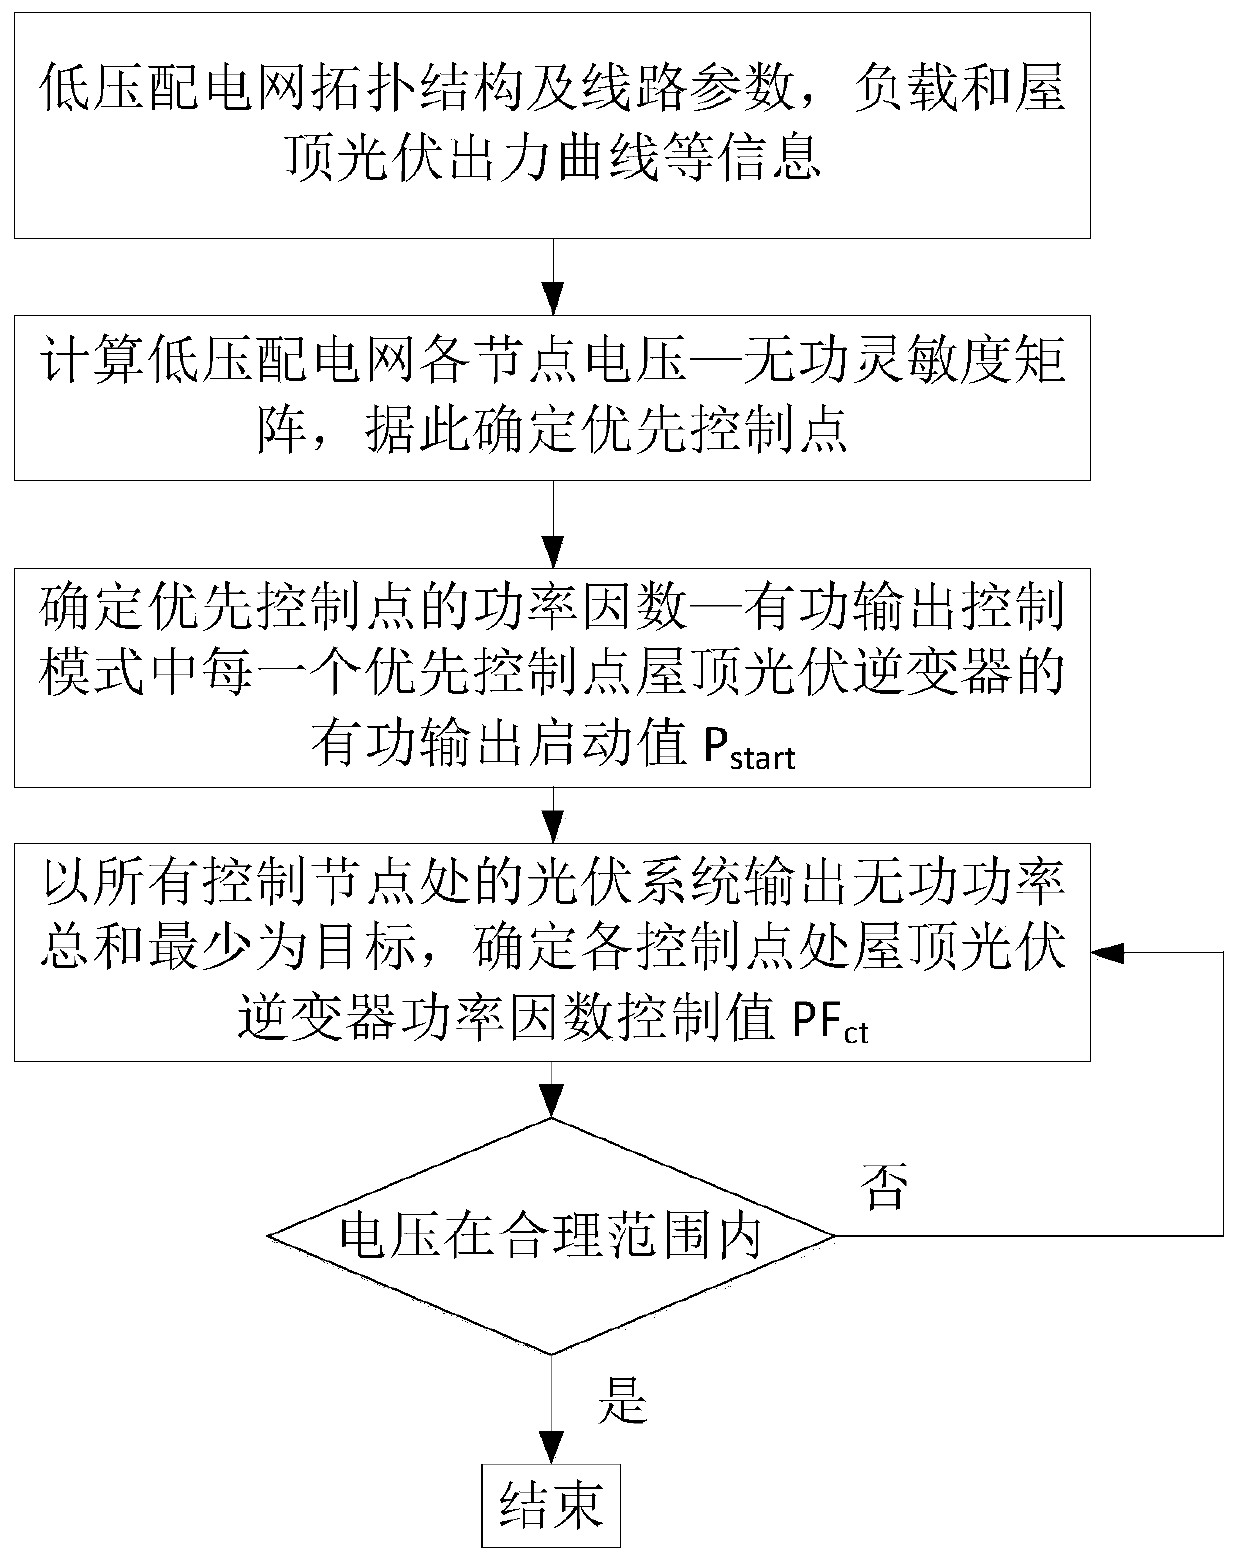 Distributed control method for household photovoltaic grid-connected inverter based on voltage sensitivity matrix